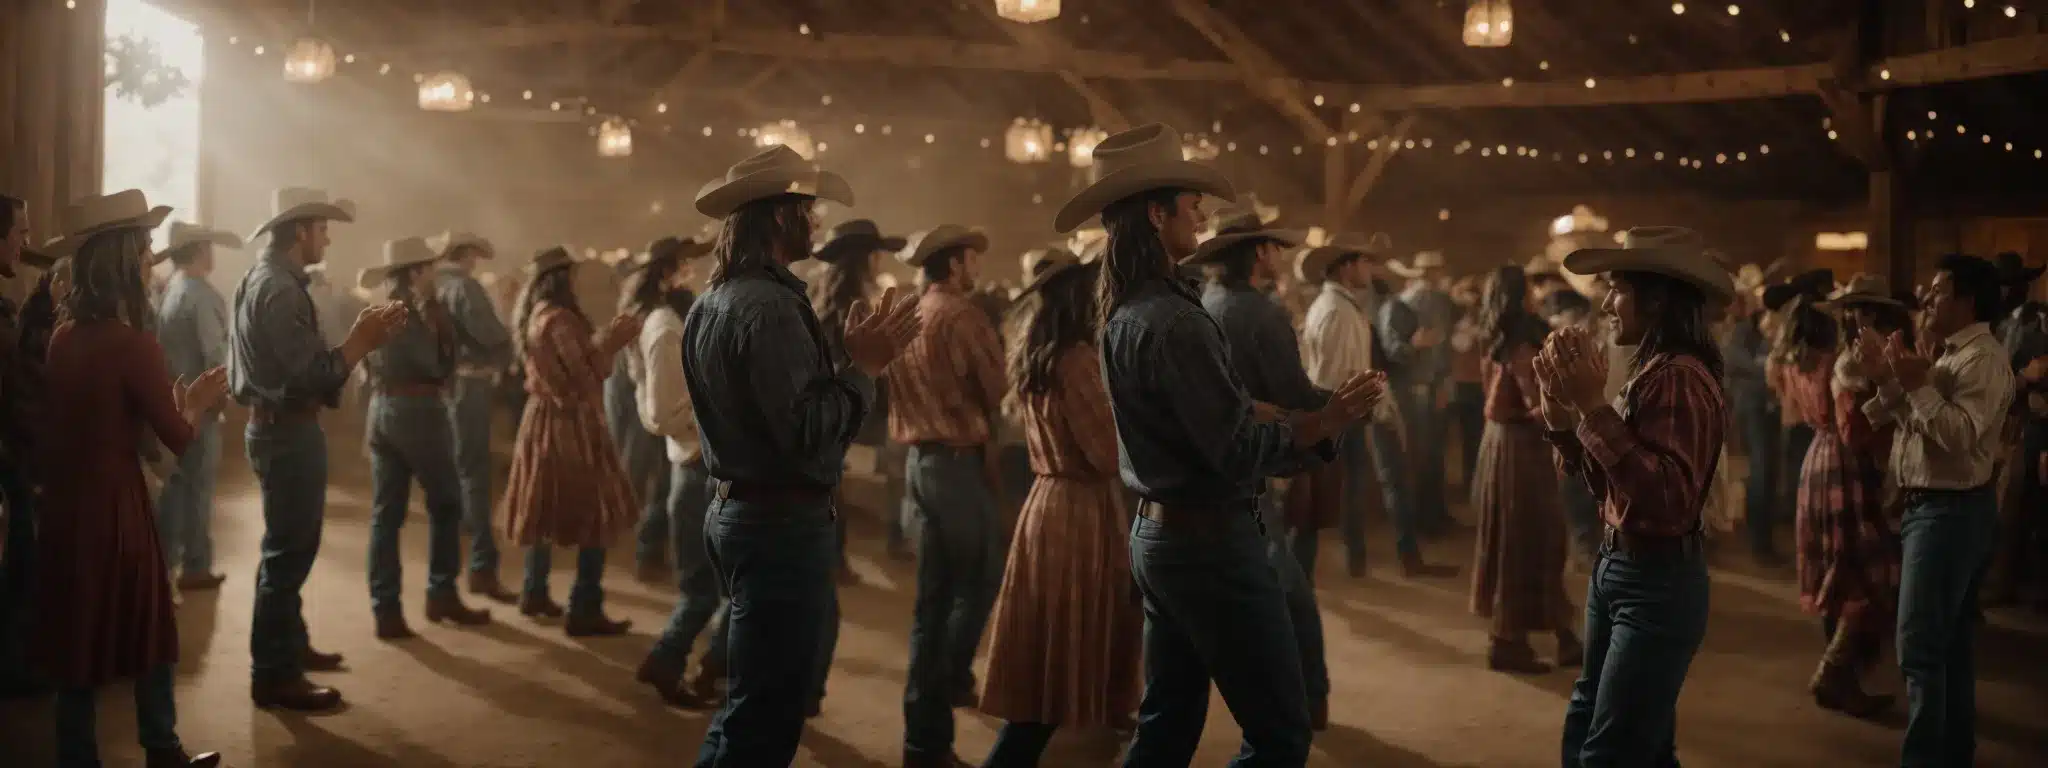 A Western-Themed Barn Dance With People Clapping And Swinging To Music.